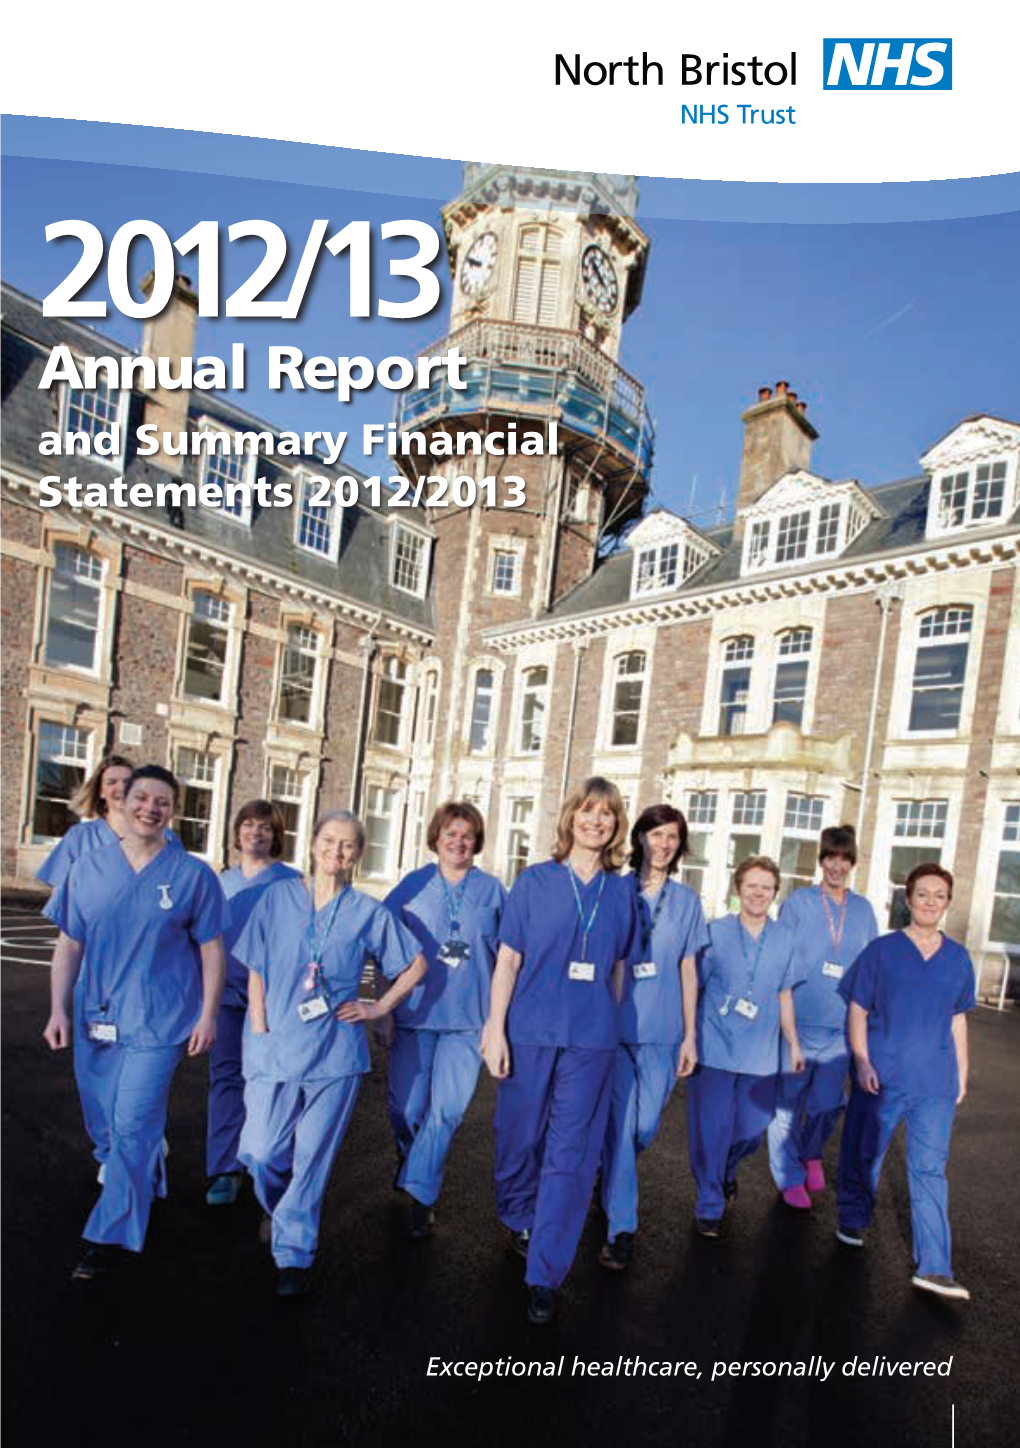 Annual Report and Summary Financial Statements 2012/2013